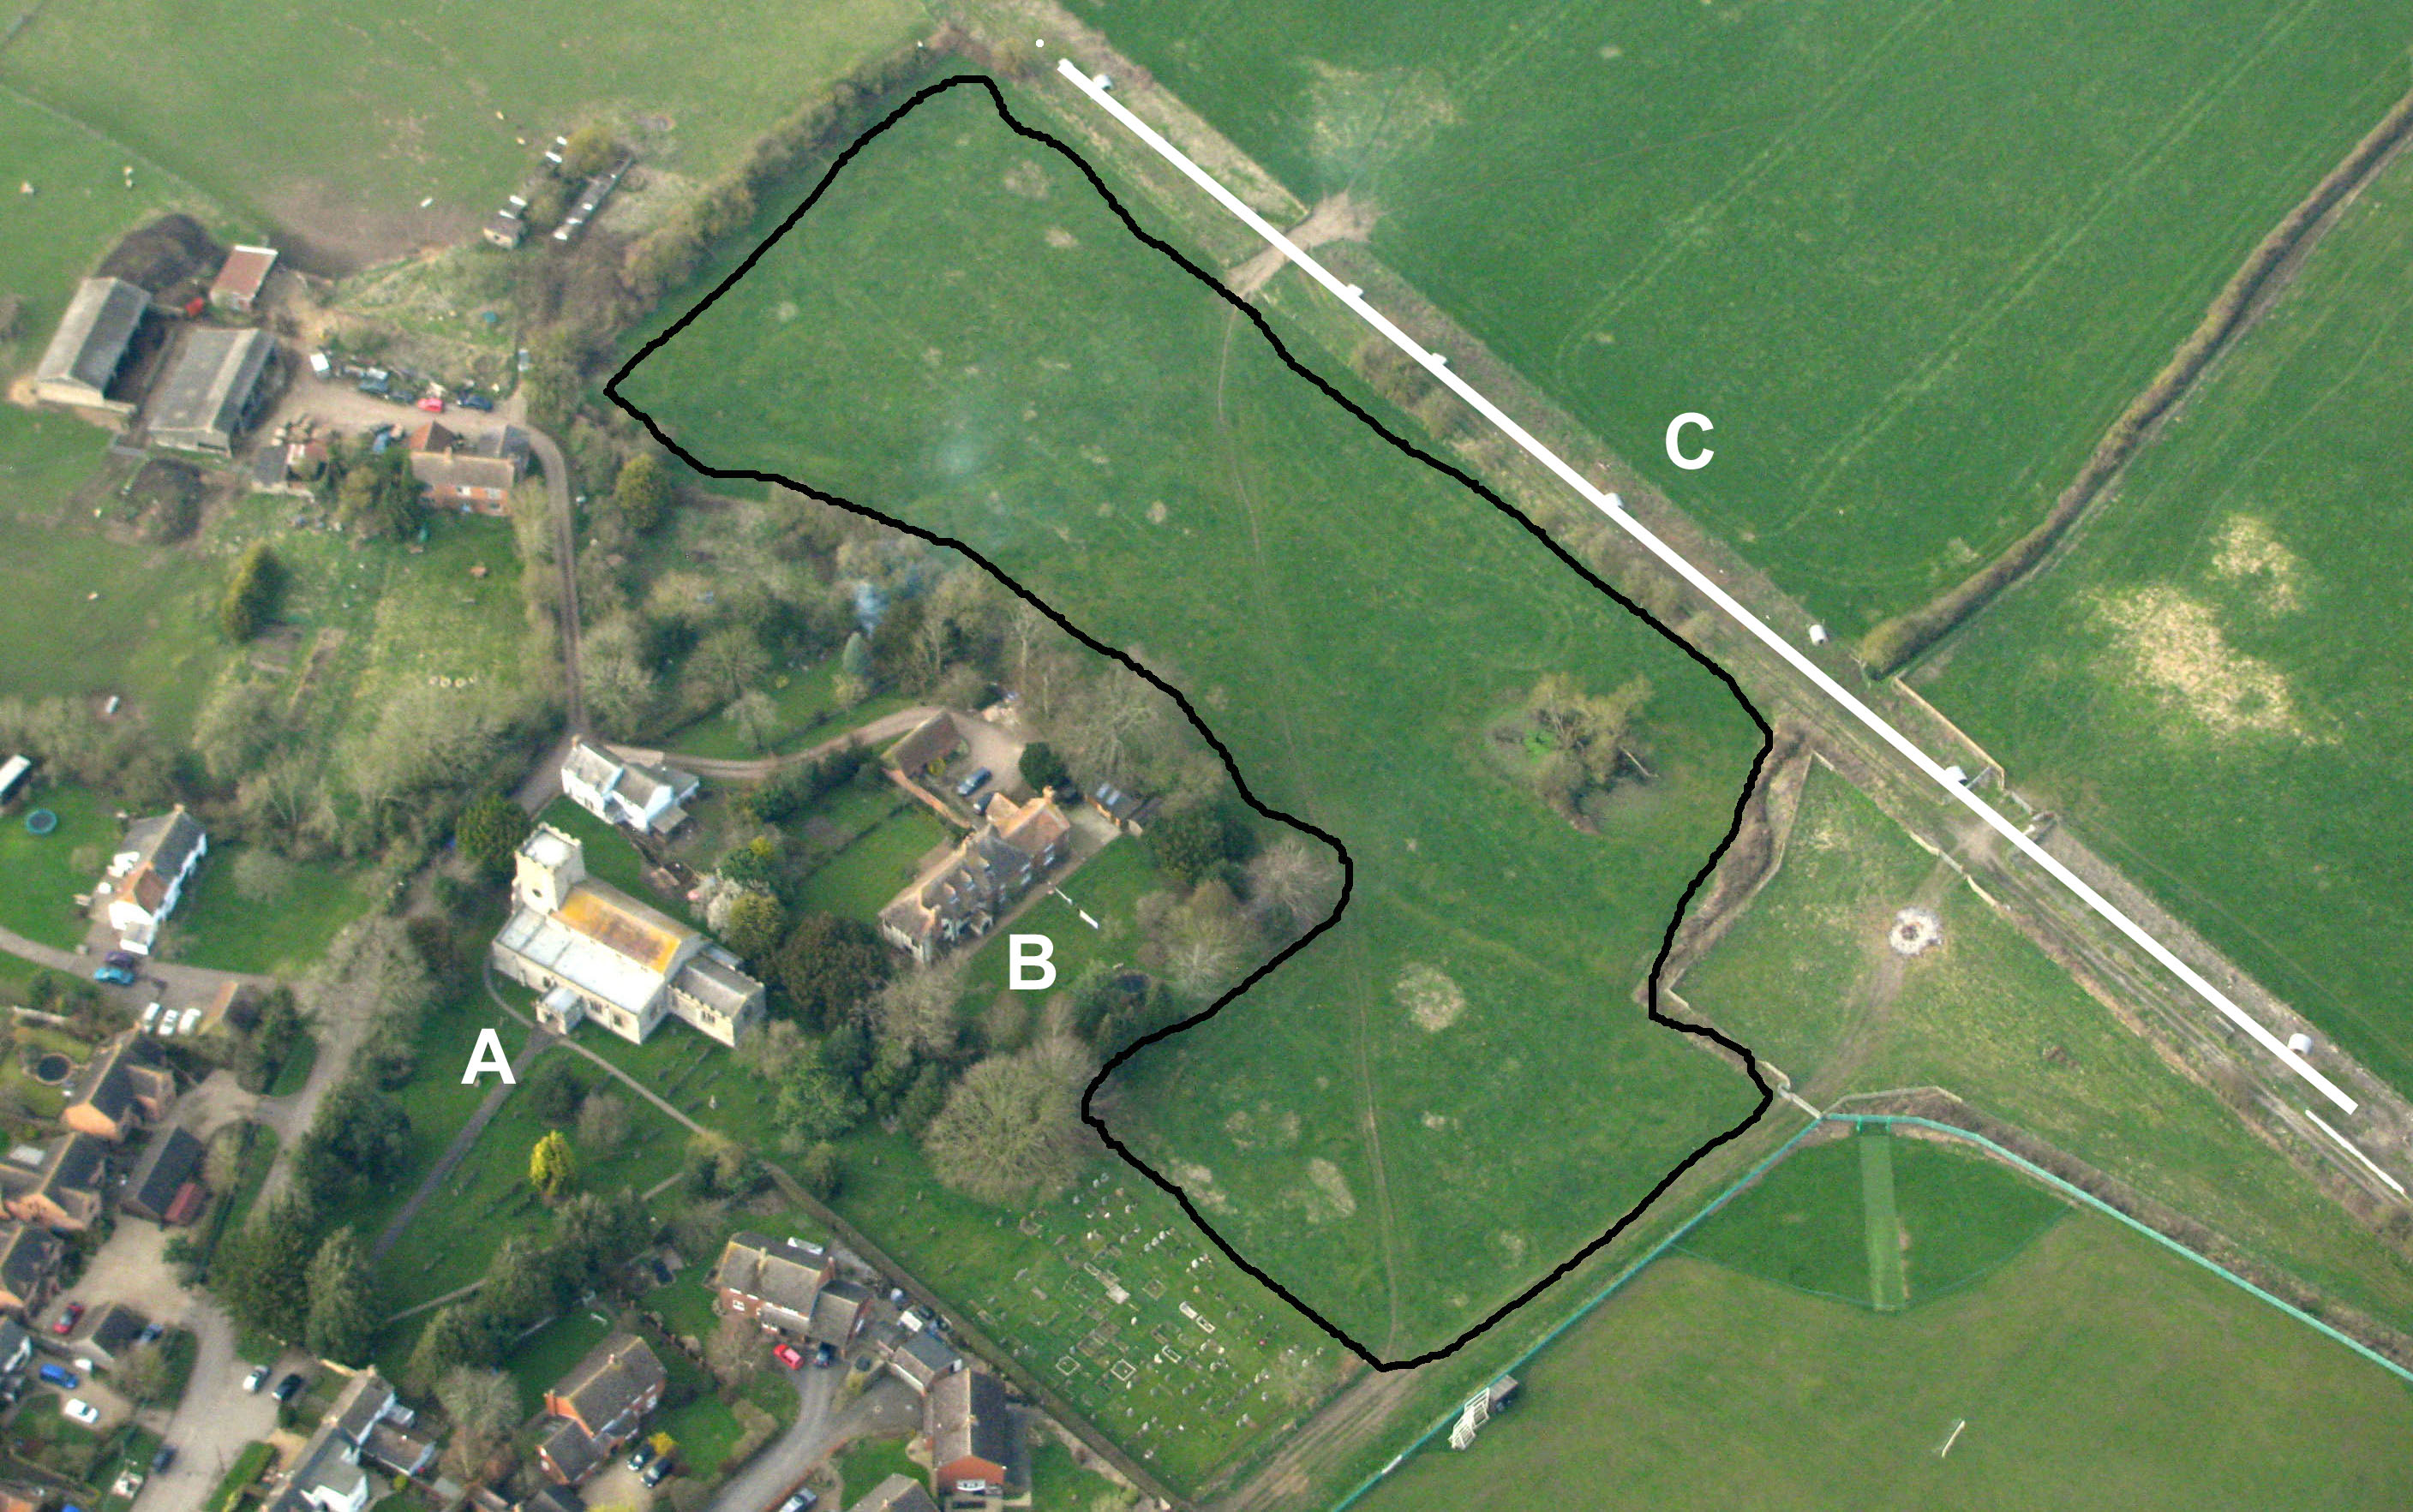 An aerial photograph of Twyford